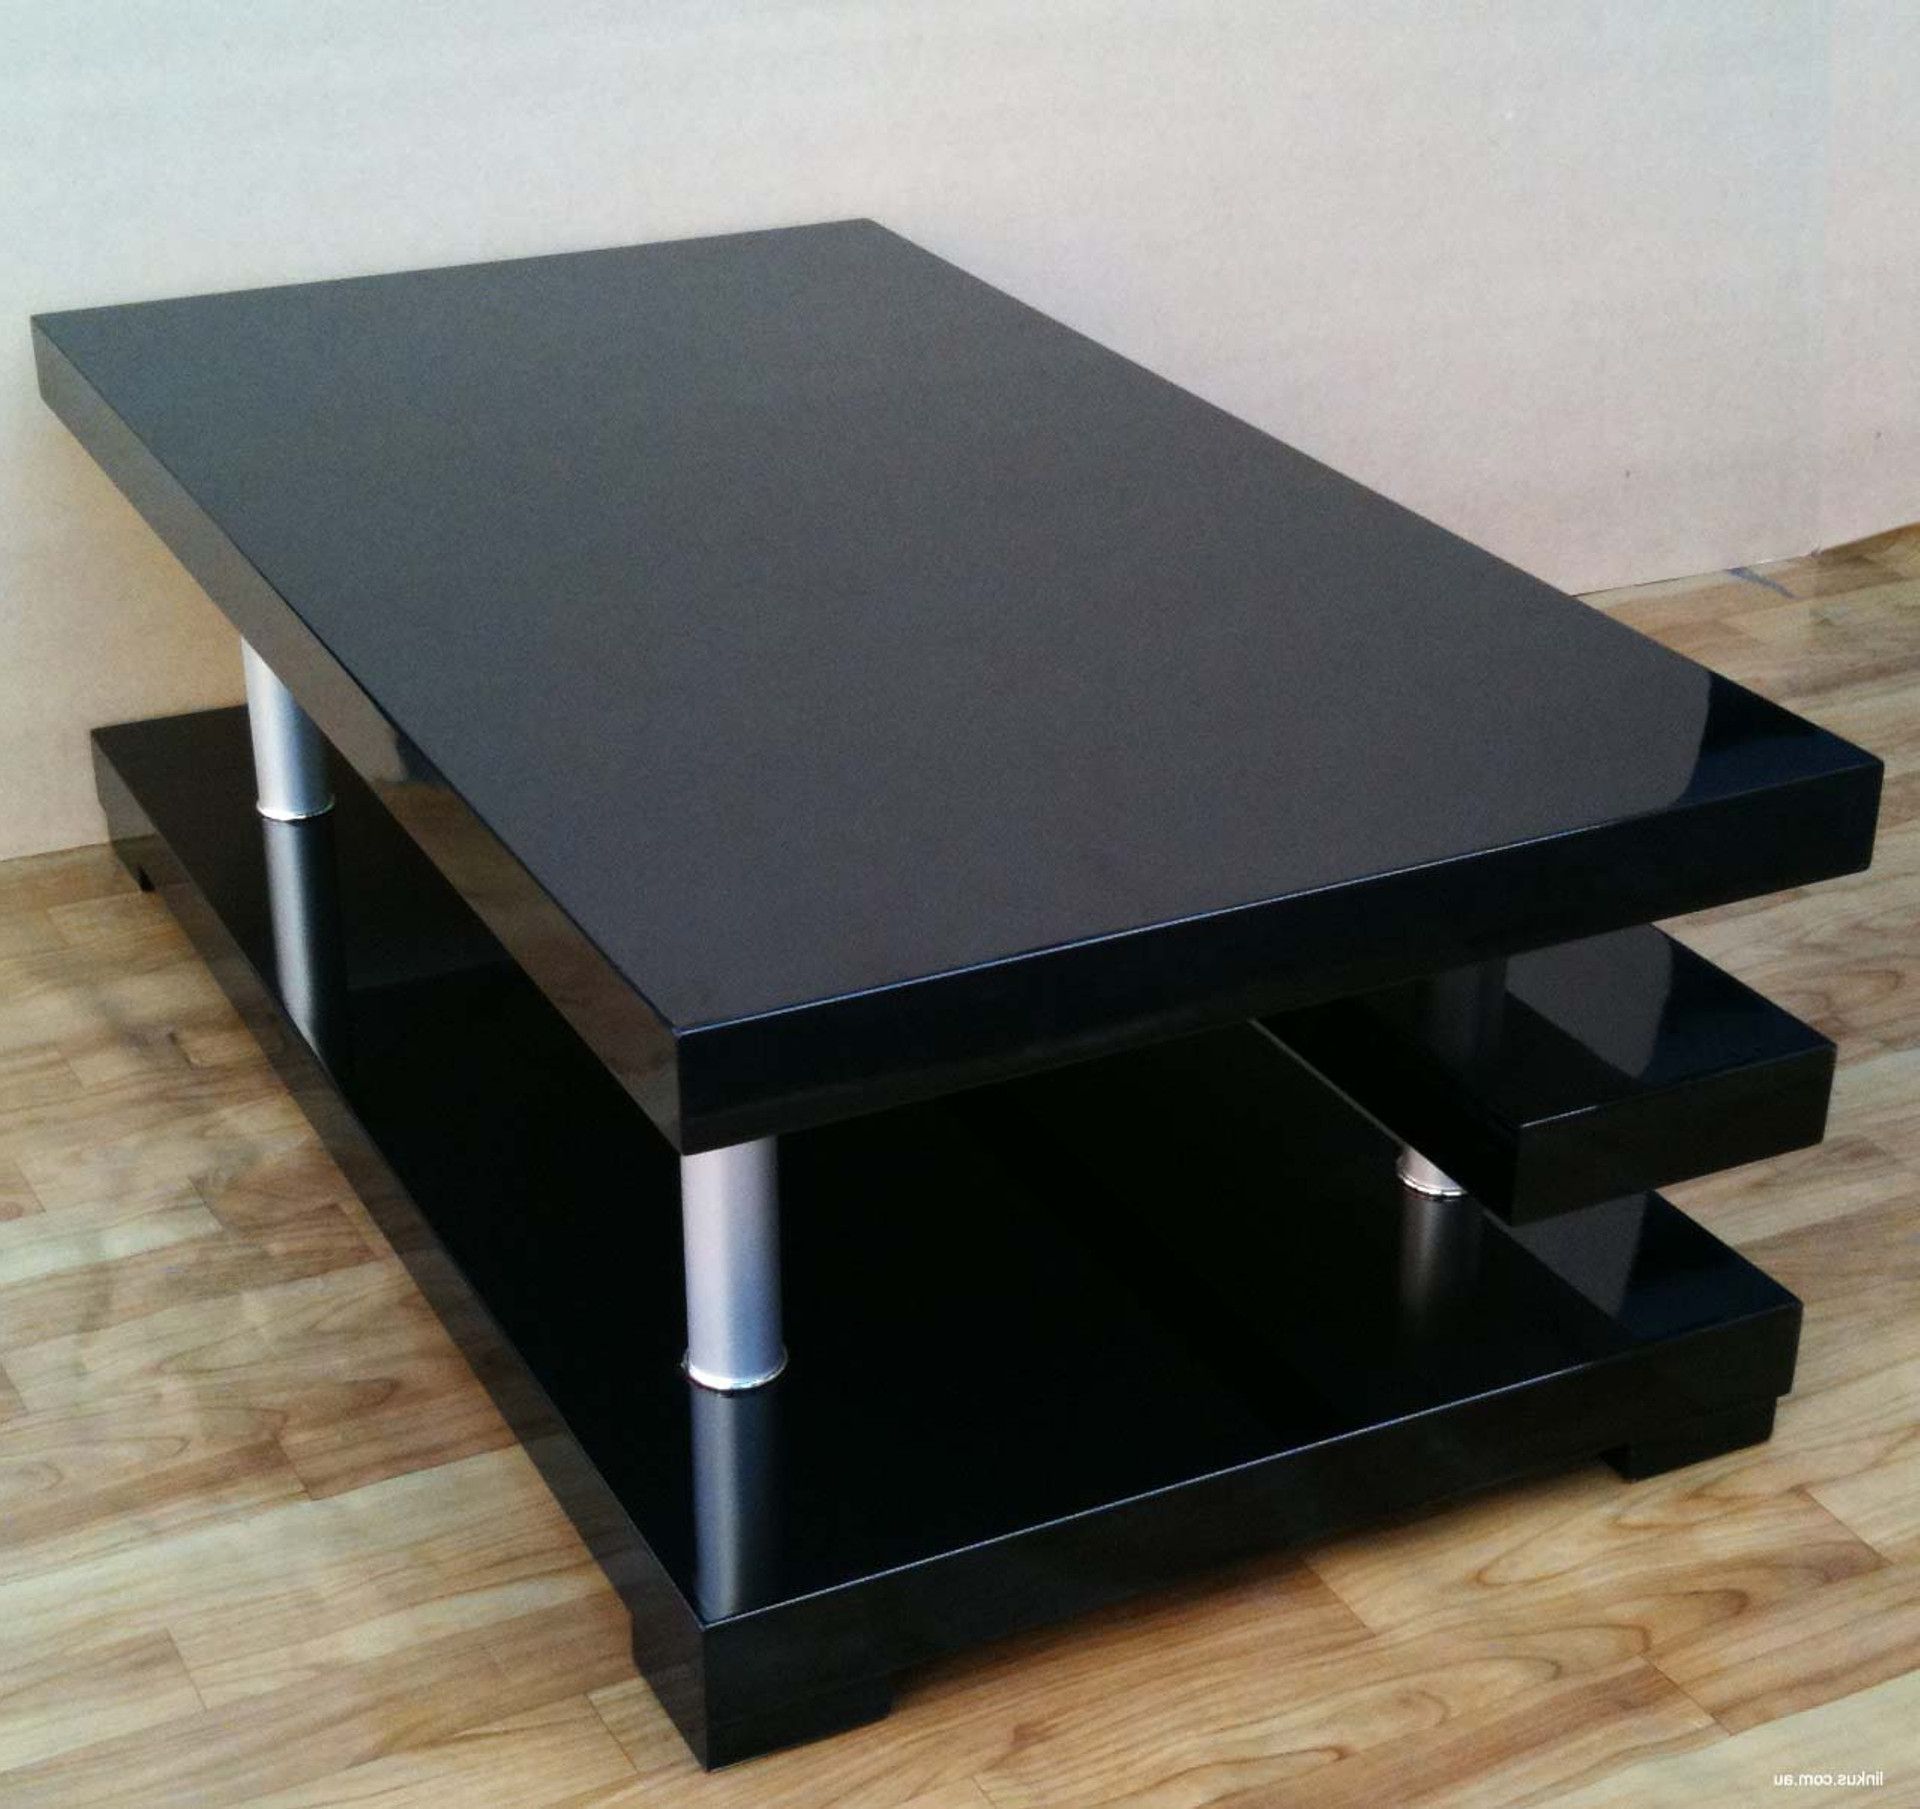 Preferred High Gloss Black Coffee Tables For Cheap Shiny Gloss Black Coffee Tea Table Furniture On Line Sales (View 13 of 15)